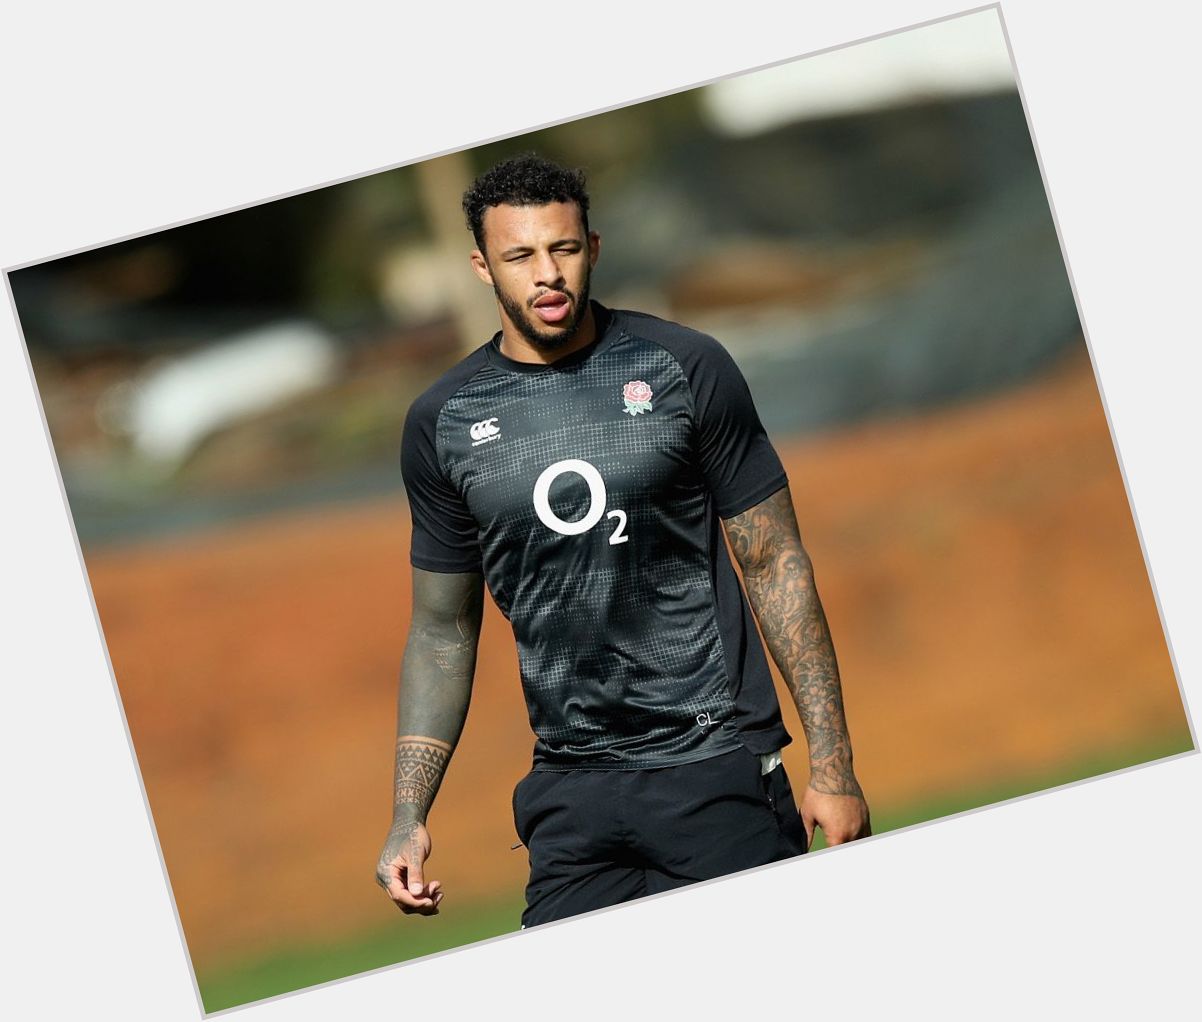 Http://fanpagepress.net/m/C/Courtney Lawes New Pic 1